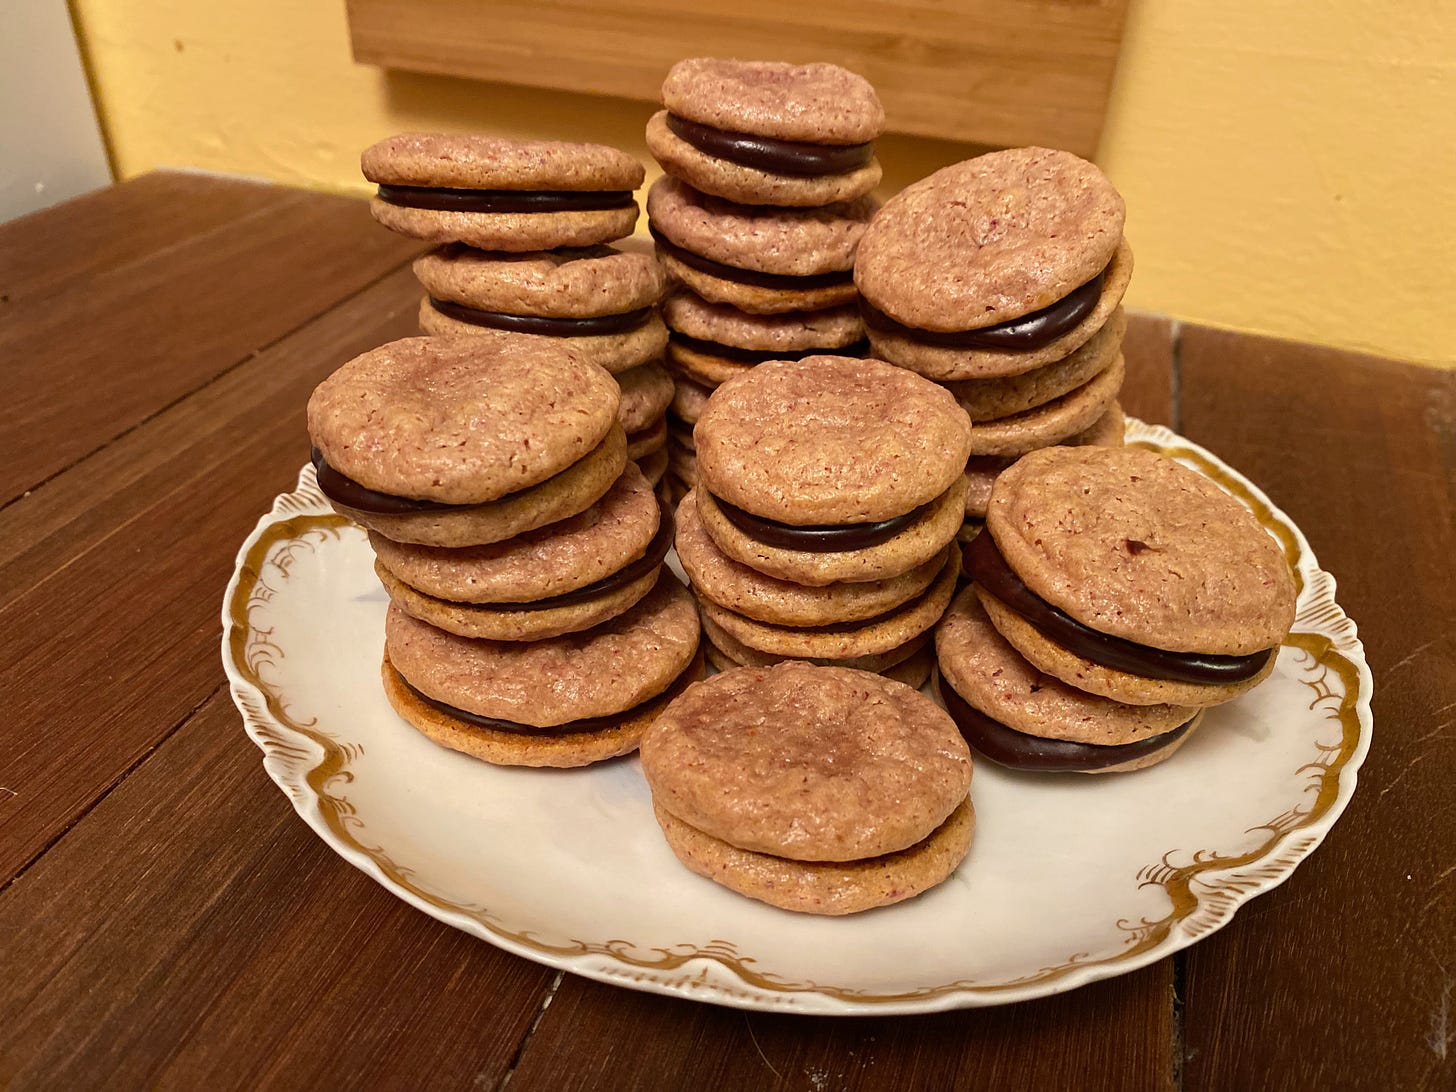 Several stacks of small round sandwich cookies sit on a ceramic plate on a wooden counter.